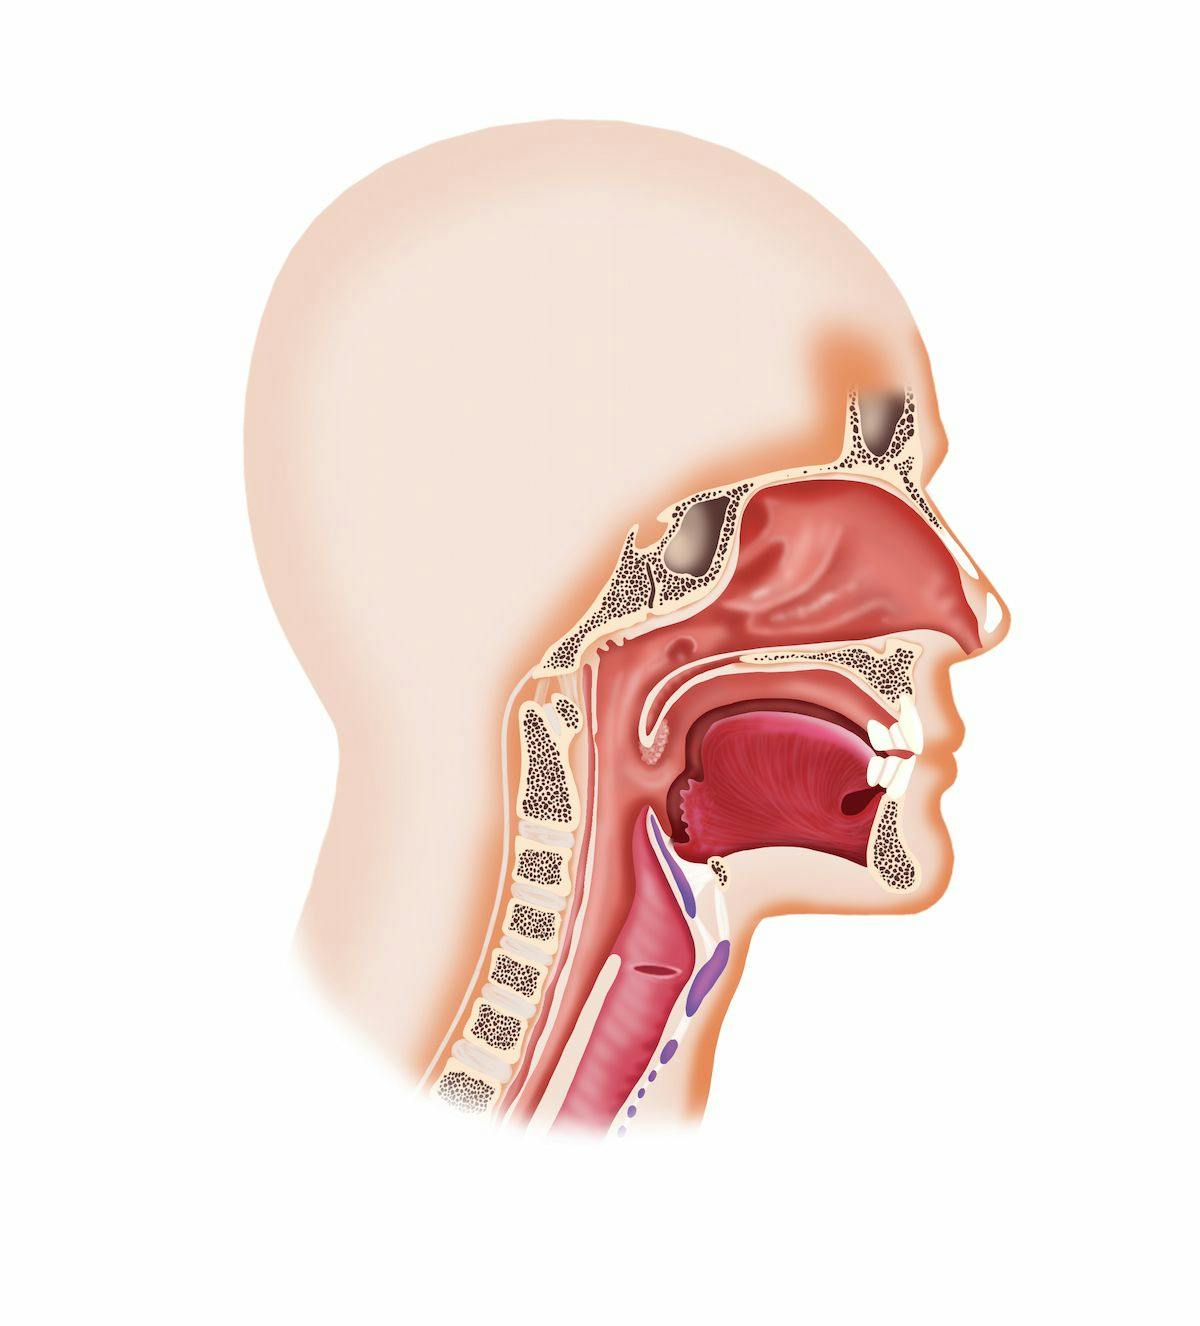 Despite an increased risk of grade 5 toxicities, patients with human papillomavirus–related oropharyngeal squamous cell carcinoma who received primary transoral surgery and neck dissection vs radiotherapy experienced good swallowing outcomes at 1 year.